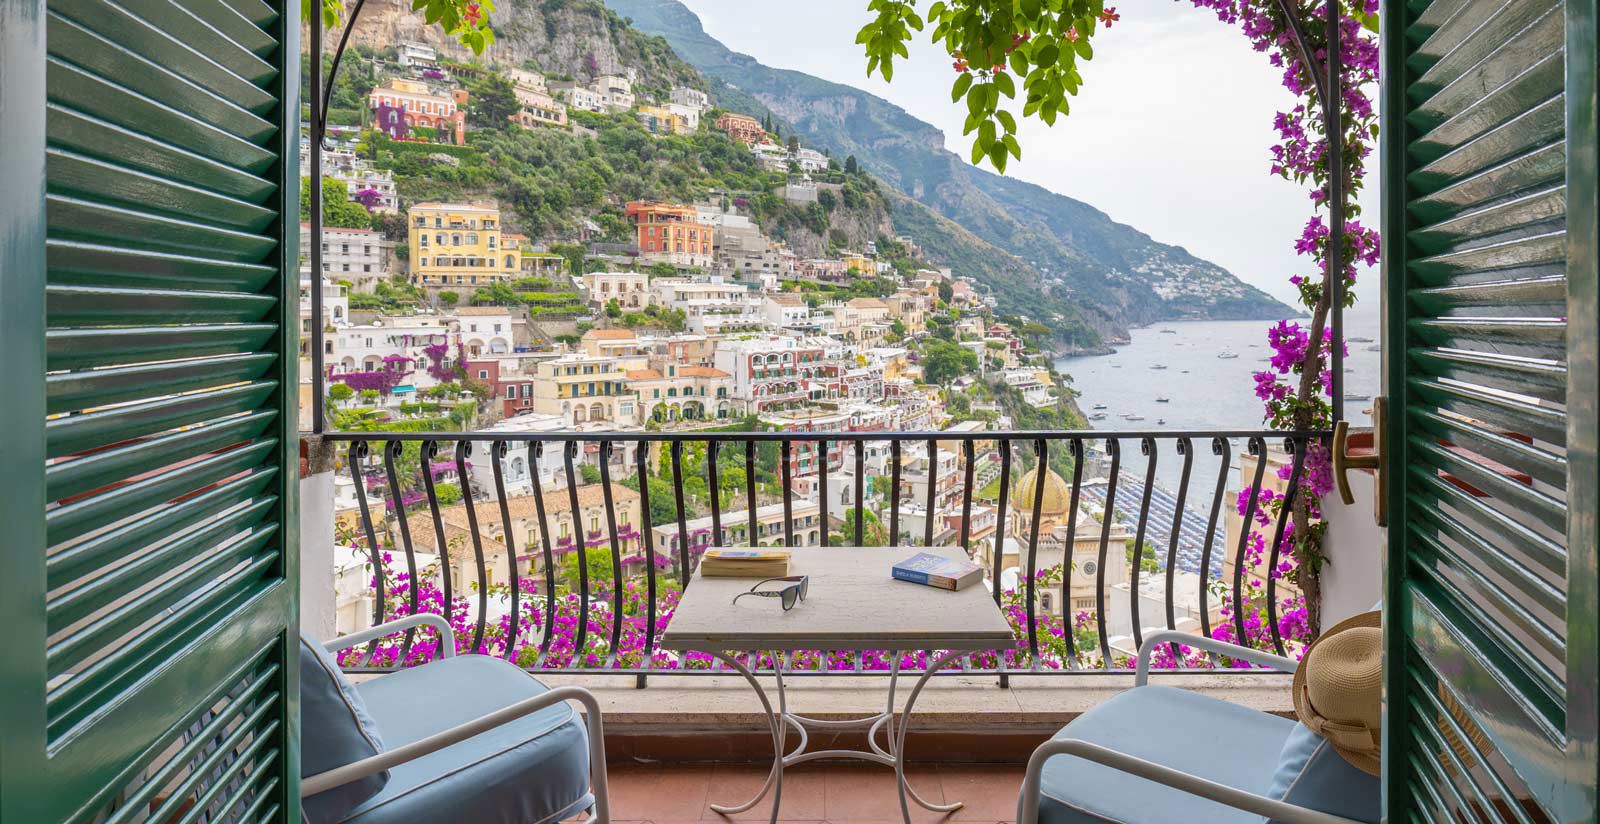 Your holiday in Positano 4